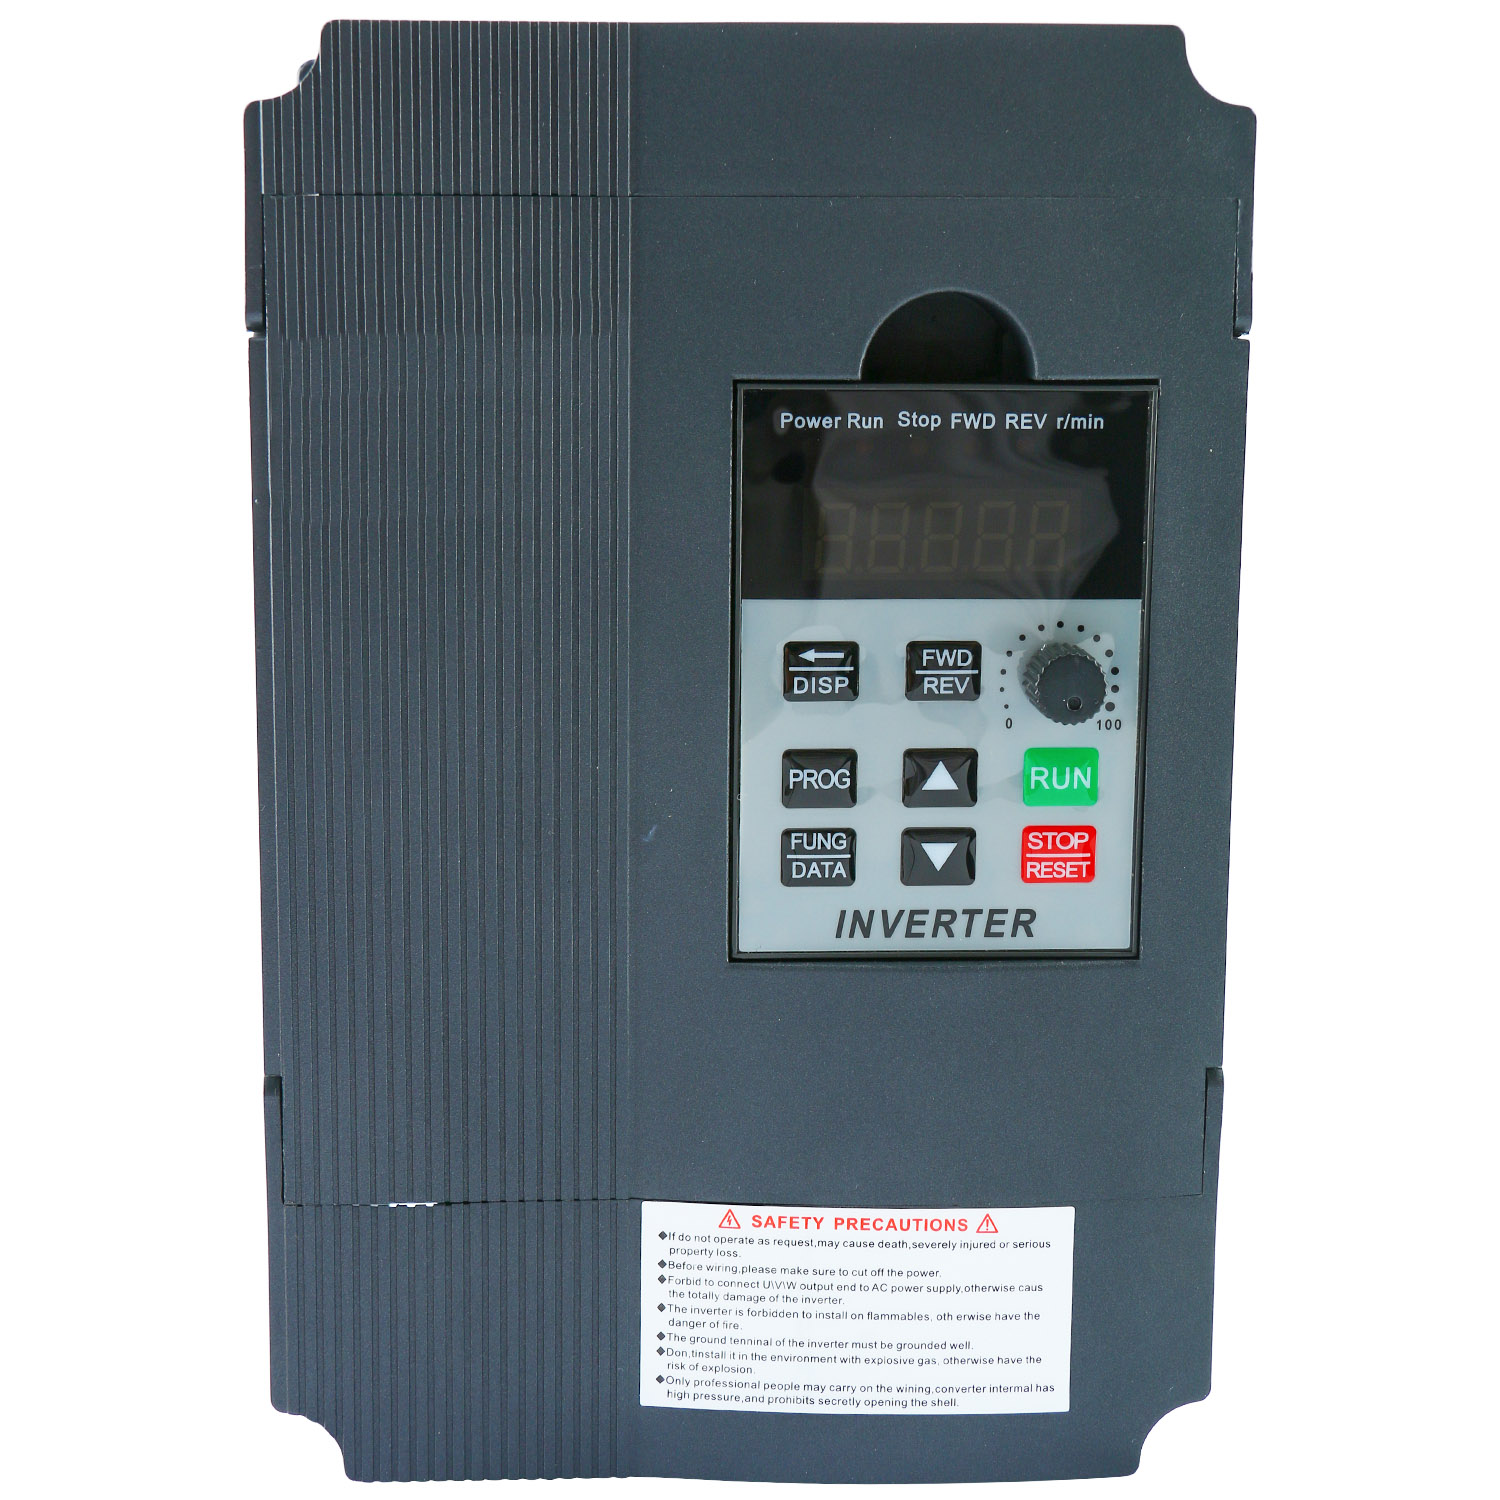 VFD Inverter Single to 3 Phase 220V Variable Frequency Drive，Low Noise and Low Electromagnetic Interference,Large Torque,Speed Controller for 3-Phase 2.2KW AC Motor